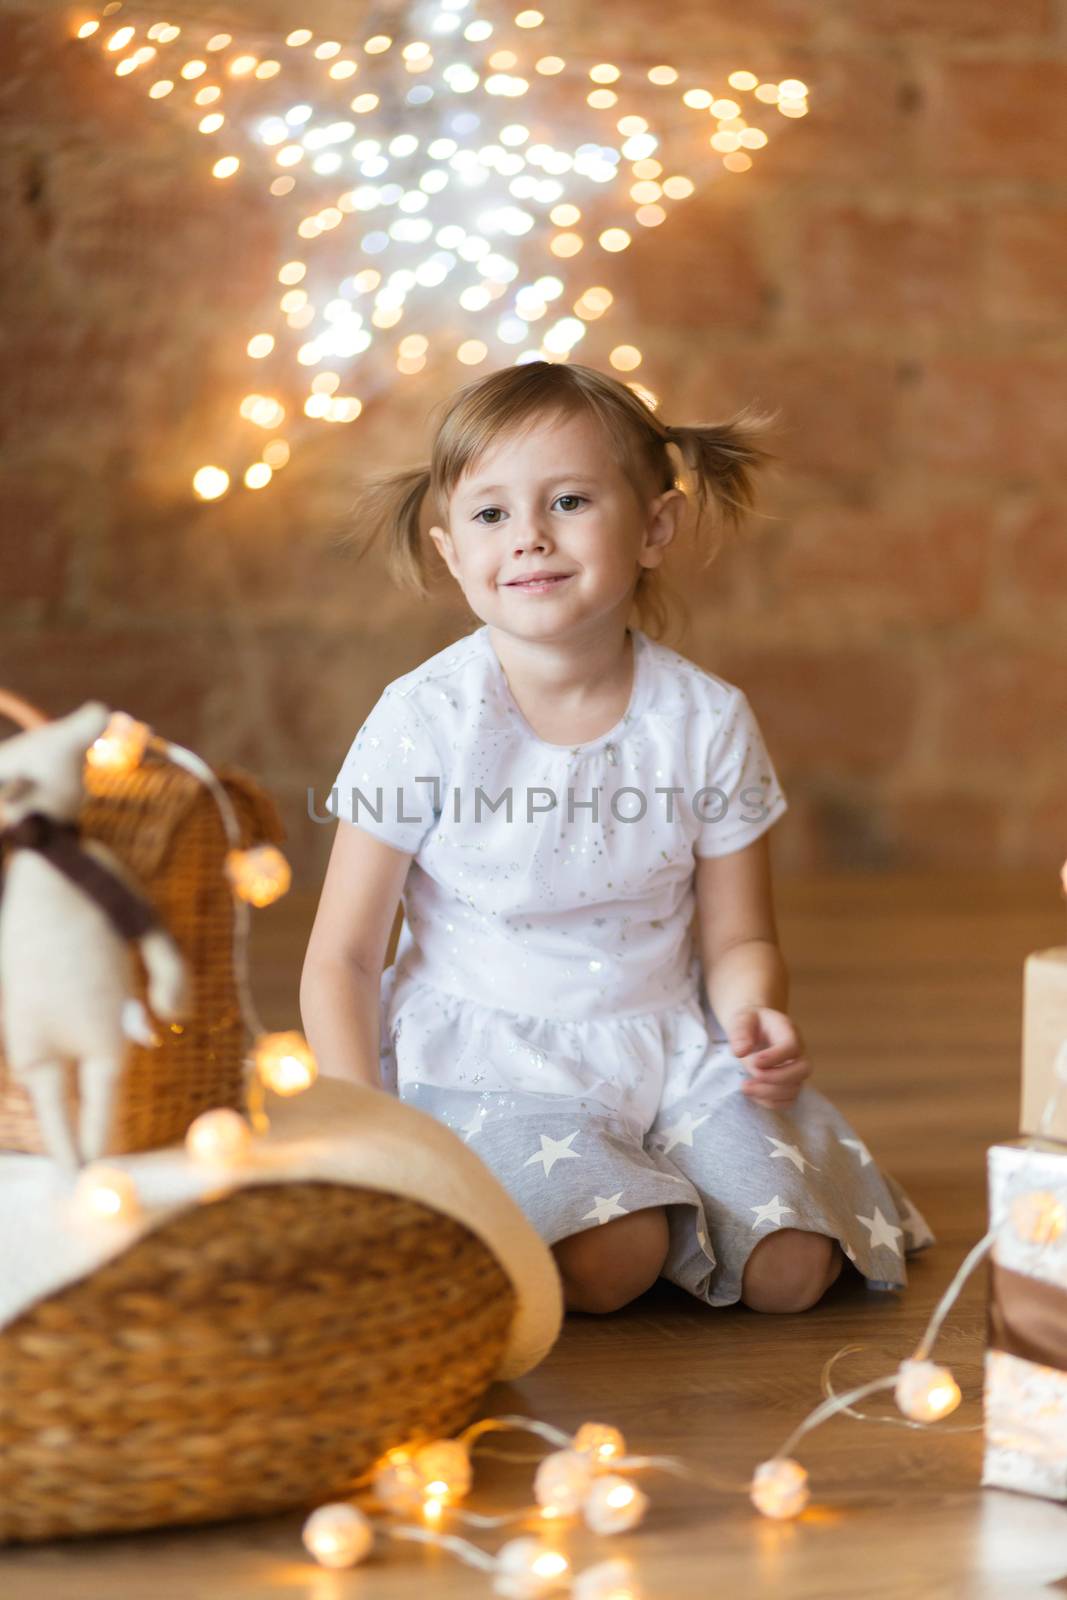 .Cute little girl sitting on the floor among the new year garlands by galinasharapova